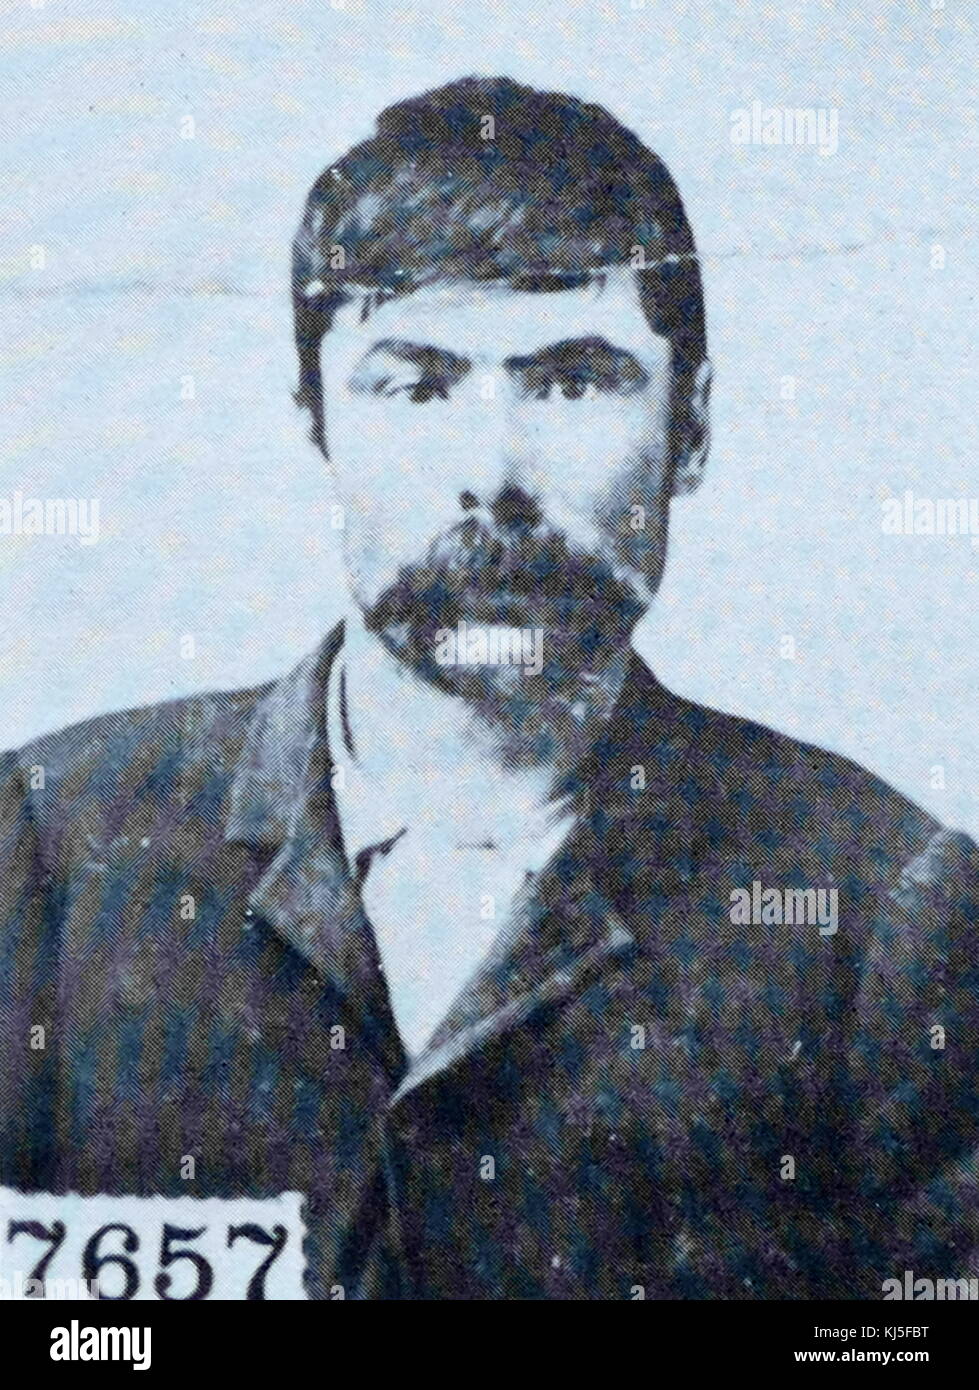 Tom O'Day was a member of the infamous 'Hole In The Wall' gang. Born in 1862. in Donegal Township Washington County, Pennsylvania. He became friends with the likes of Kid Currie, Butch Cassidy & the Sundance Kid. Working out of the 'Hole-In-The-Wall country. During the wild outlaw years between 1903-1910. Tom was an active participant in many of the bank and train robberies that occurred in Wyoming, South Dakota, Colorado, and Utah. Stock Photo